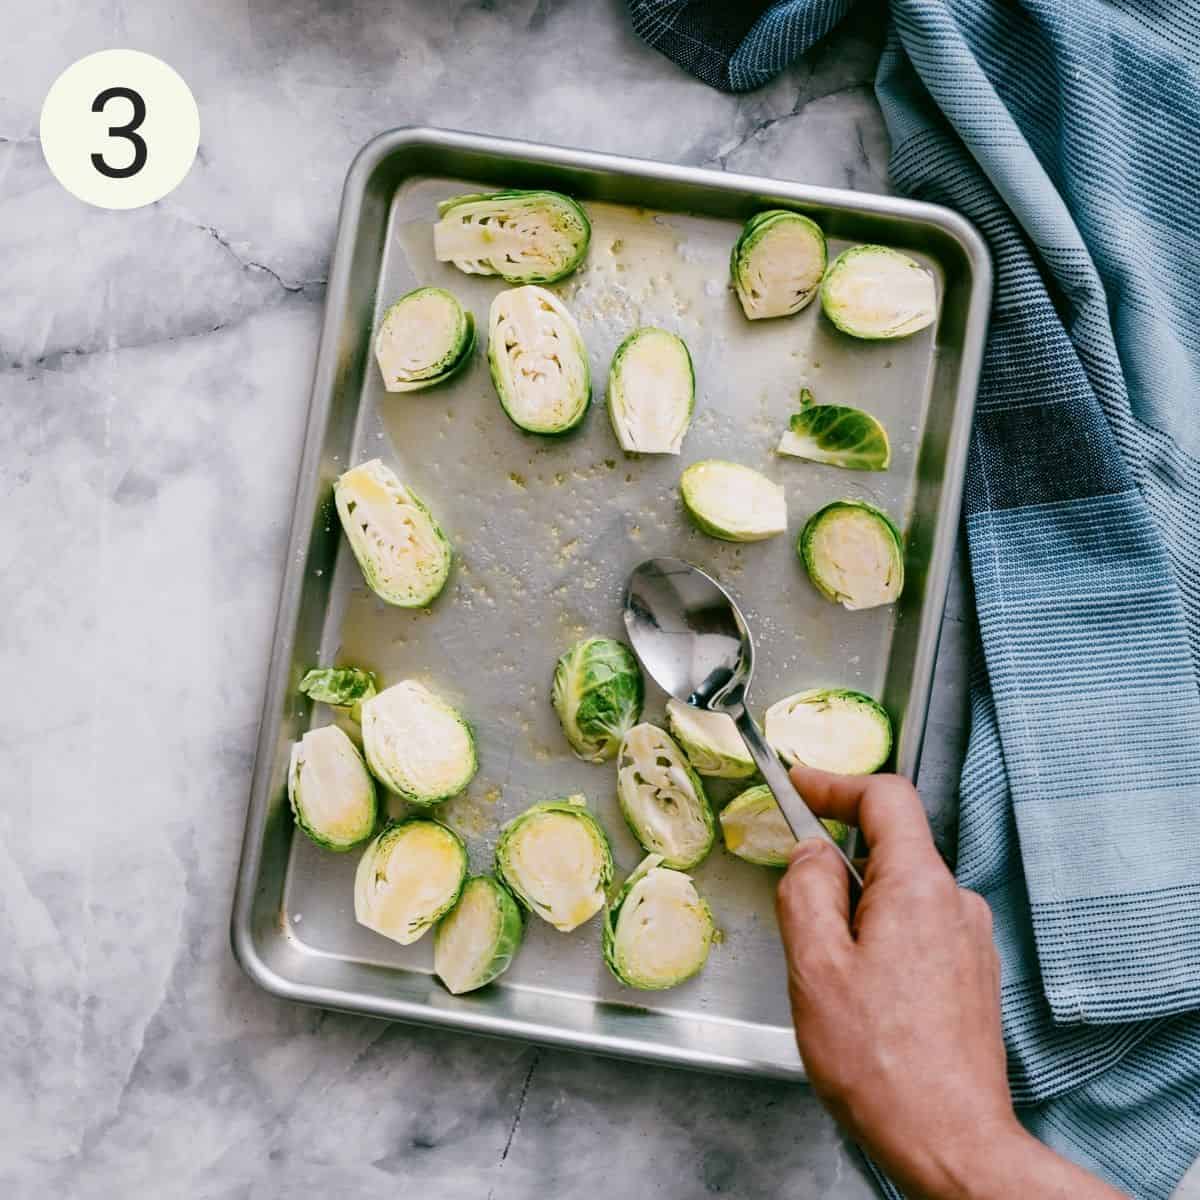 tossing halved brussels sprouts with olive oil, salt and pepper on a roasting pan.